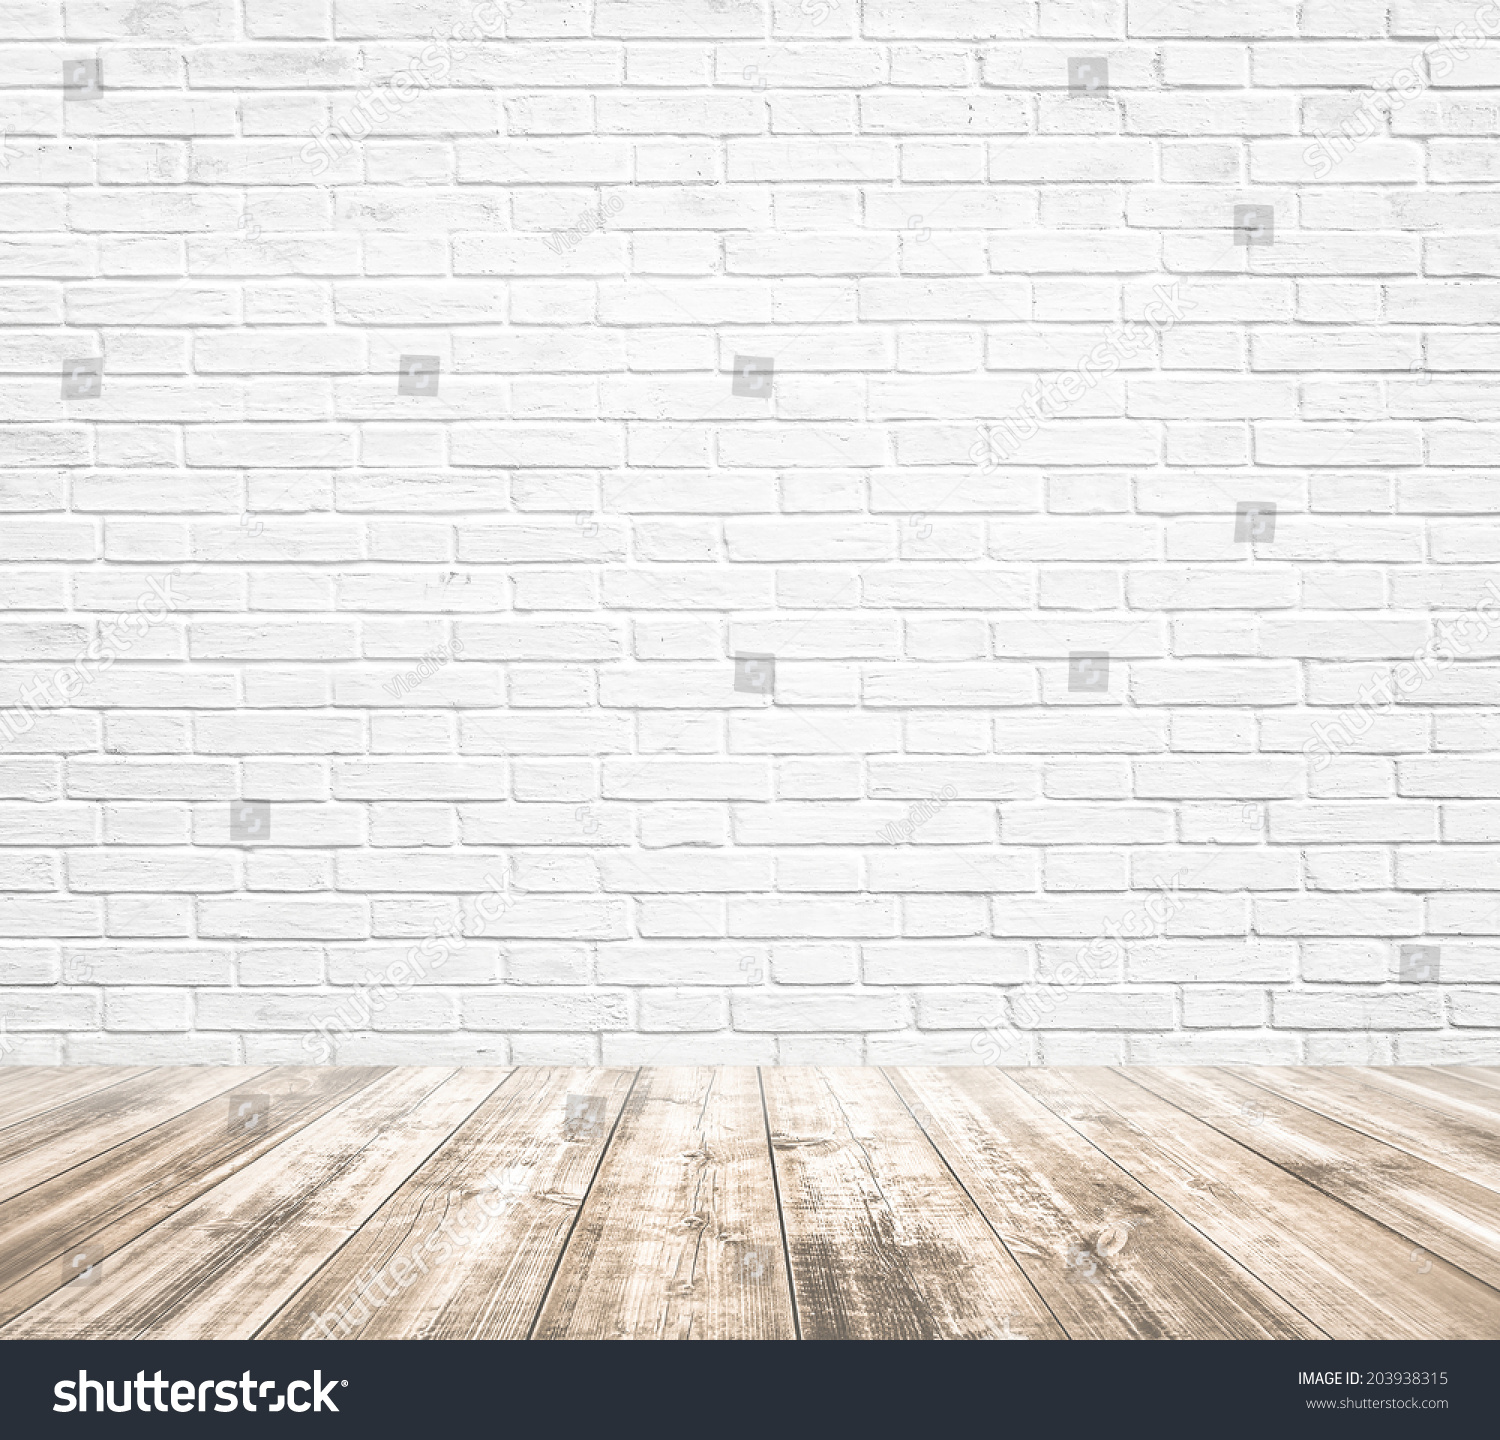 Casual. background Images, Stock Photos & Vectors | Shutterstock